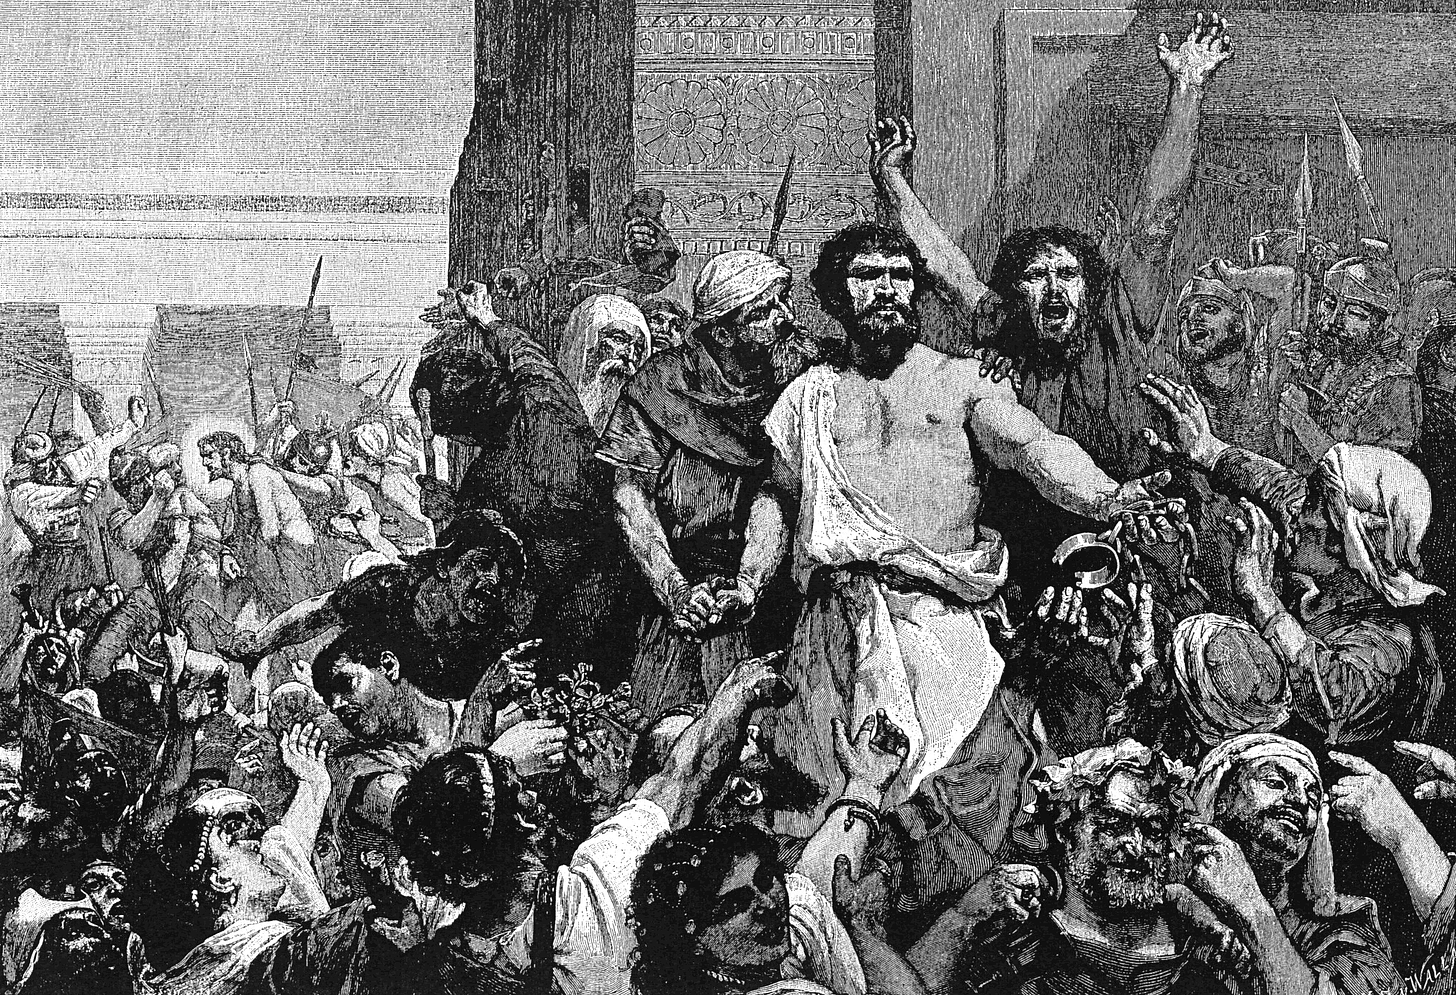 Image of Barabbas with the crowds